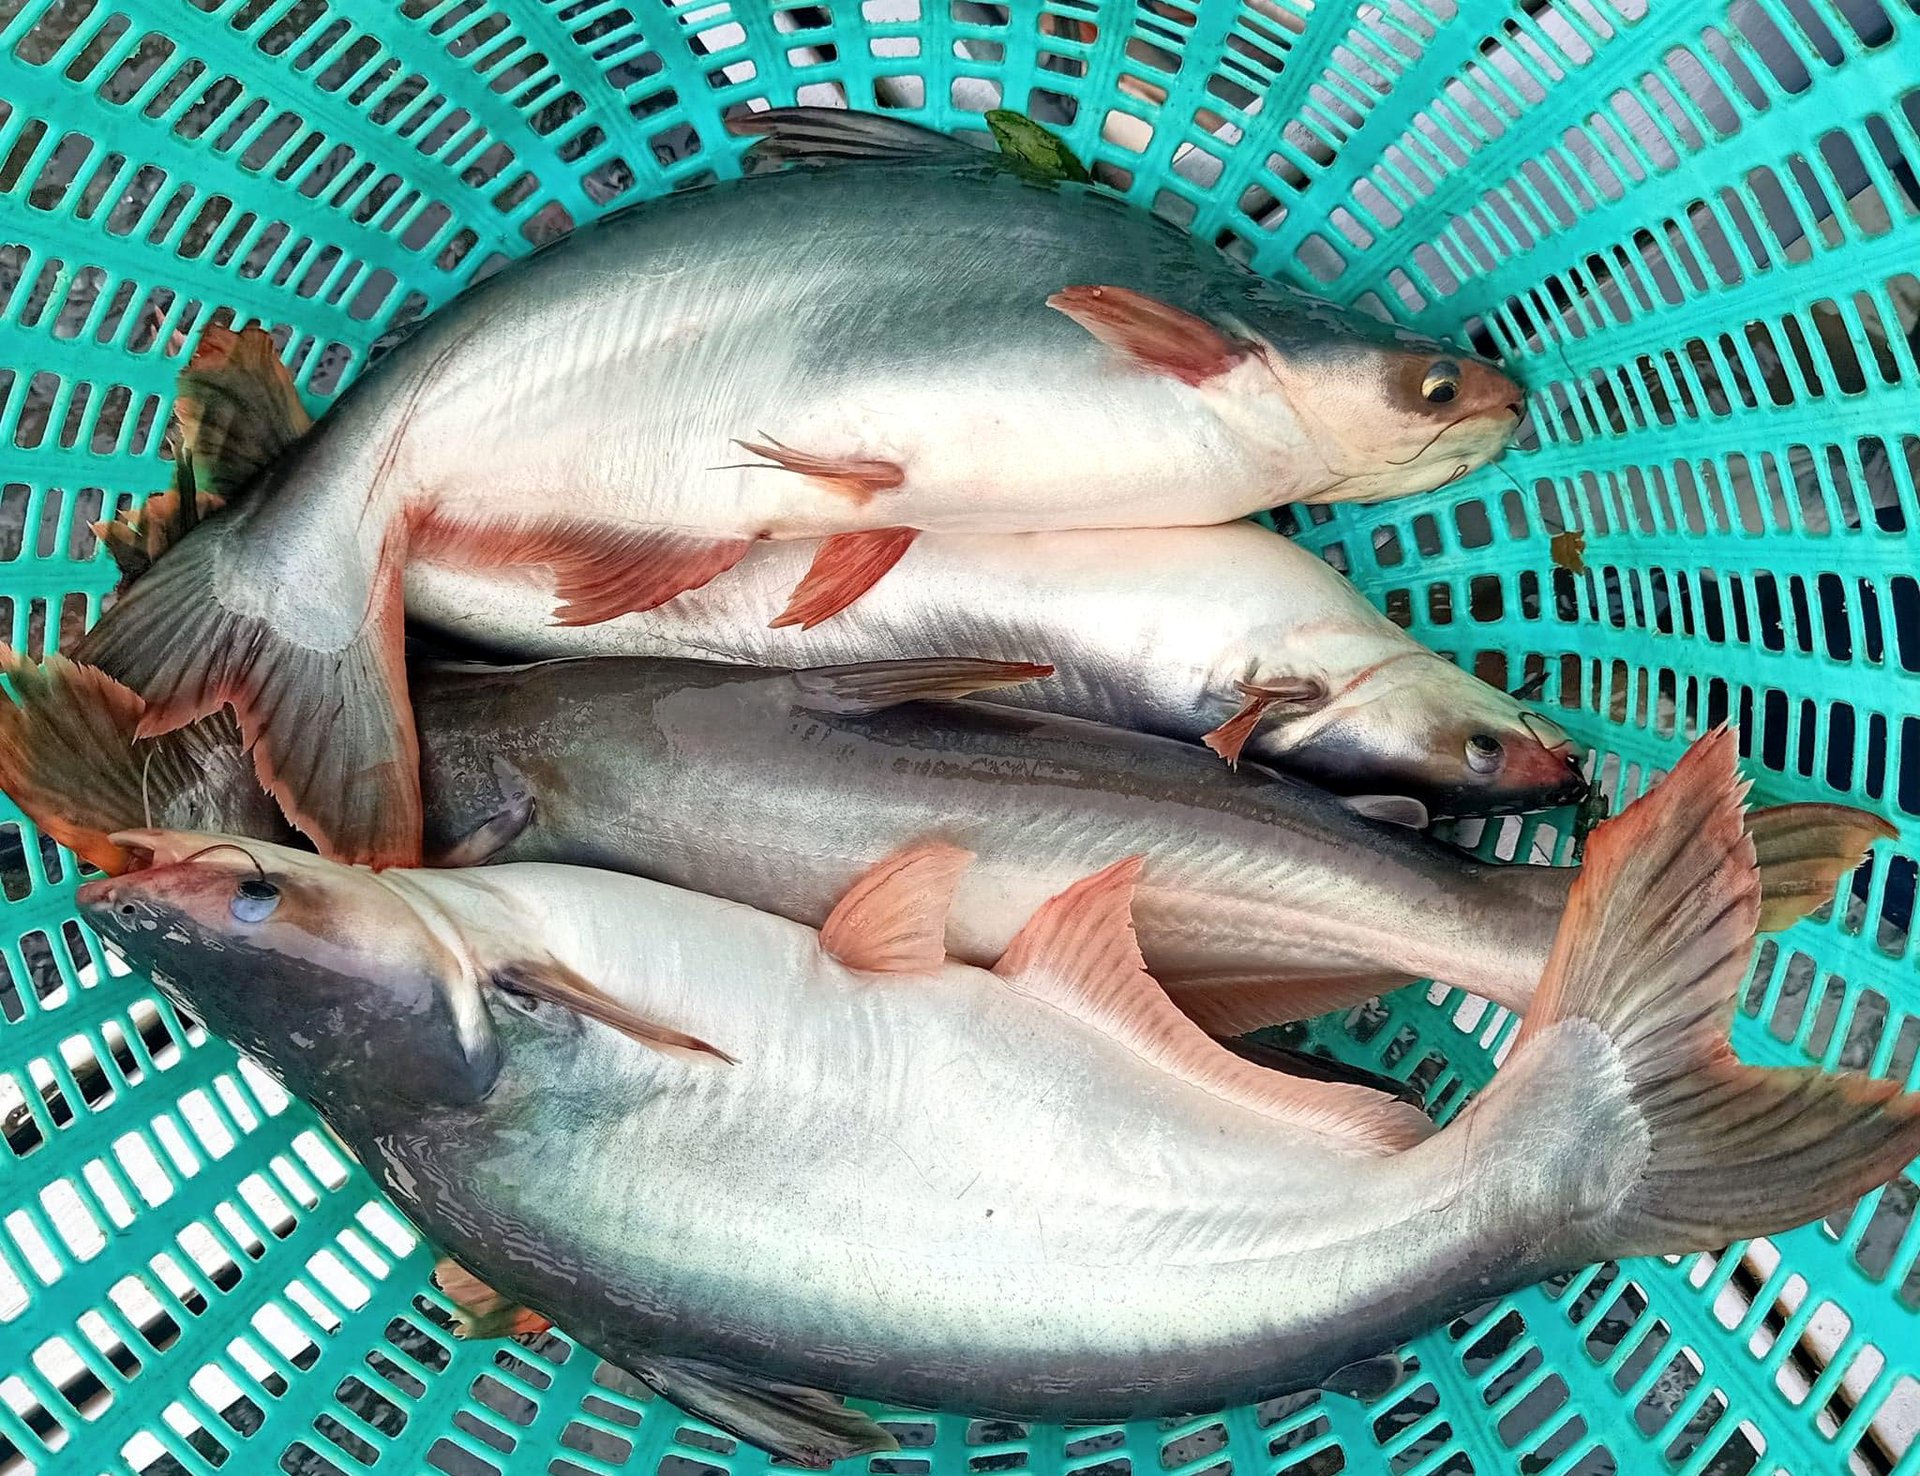 Vietnam accounts for about 60% of the world's pangasius production. Photo: Son Trang.